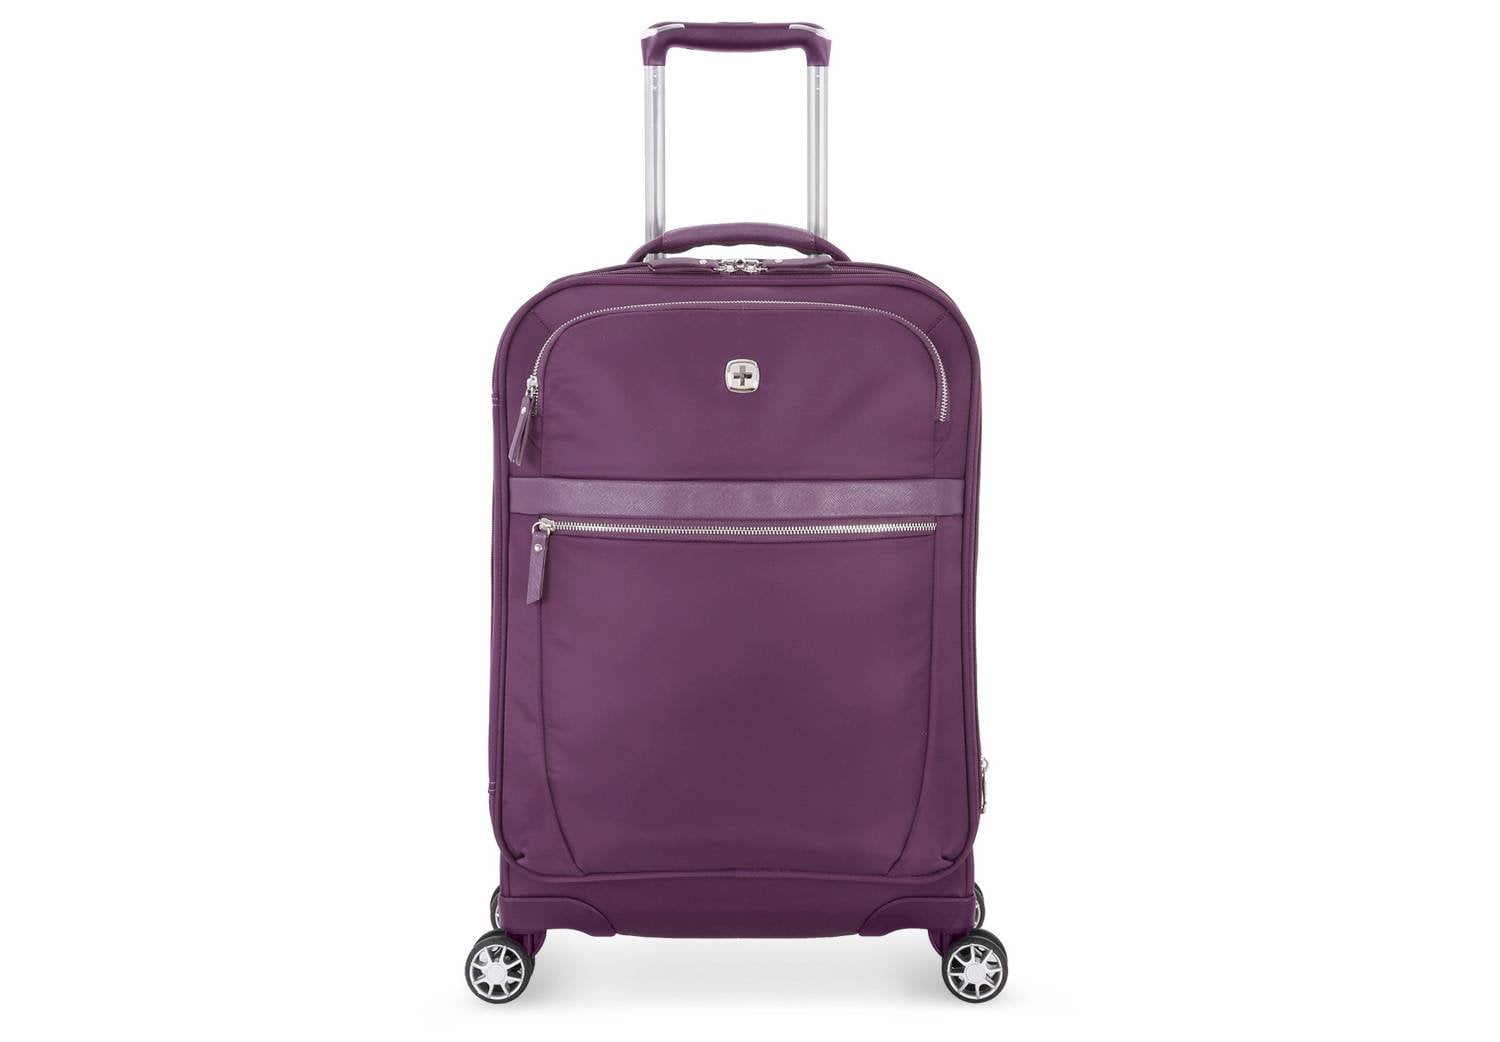 SwissGear Geneva 20 Expandable Dual-Spinner Carry-On Luggage 